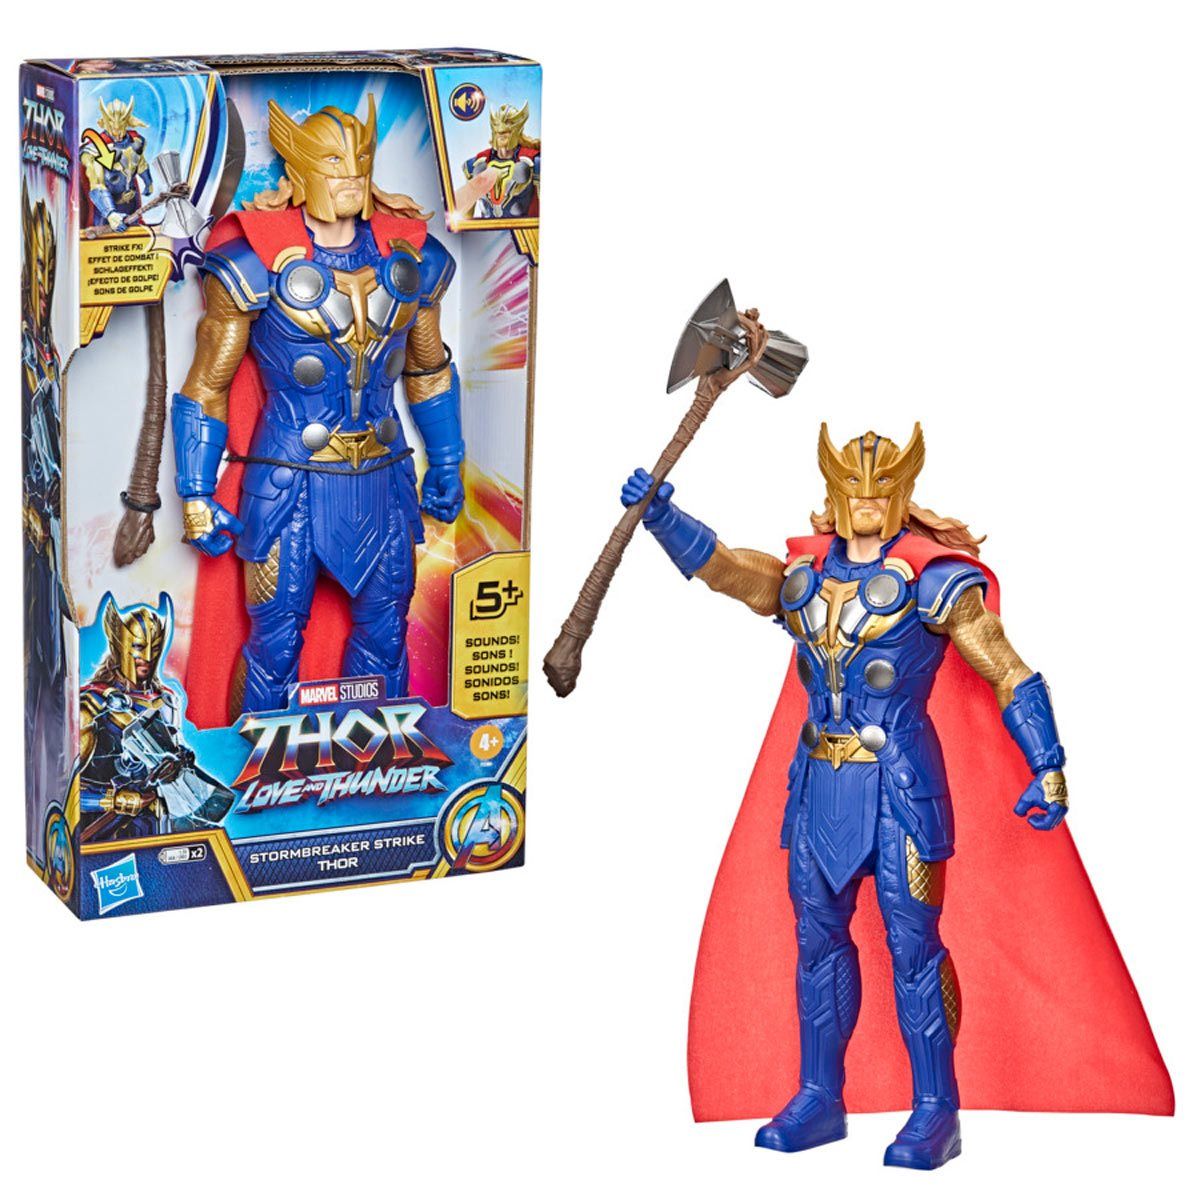 More Thor: Love And Thunder Toys Available For Pre-Order